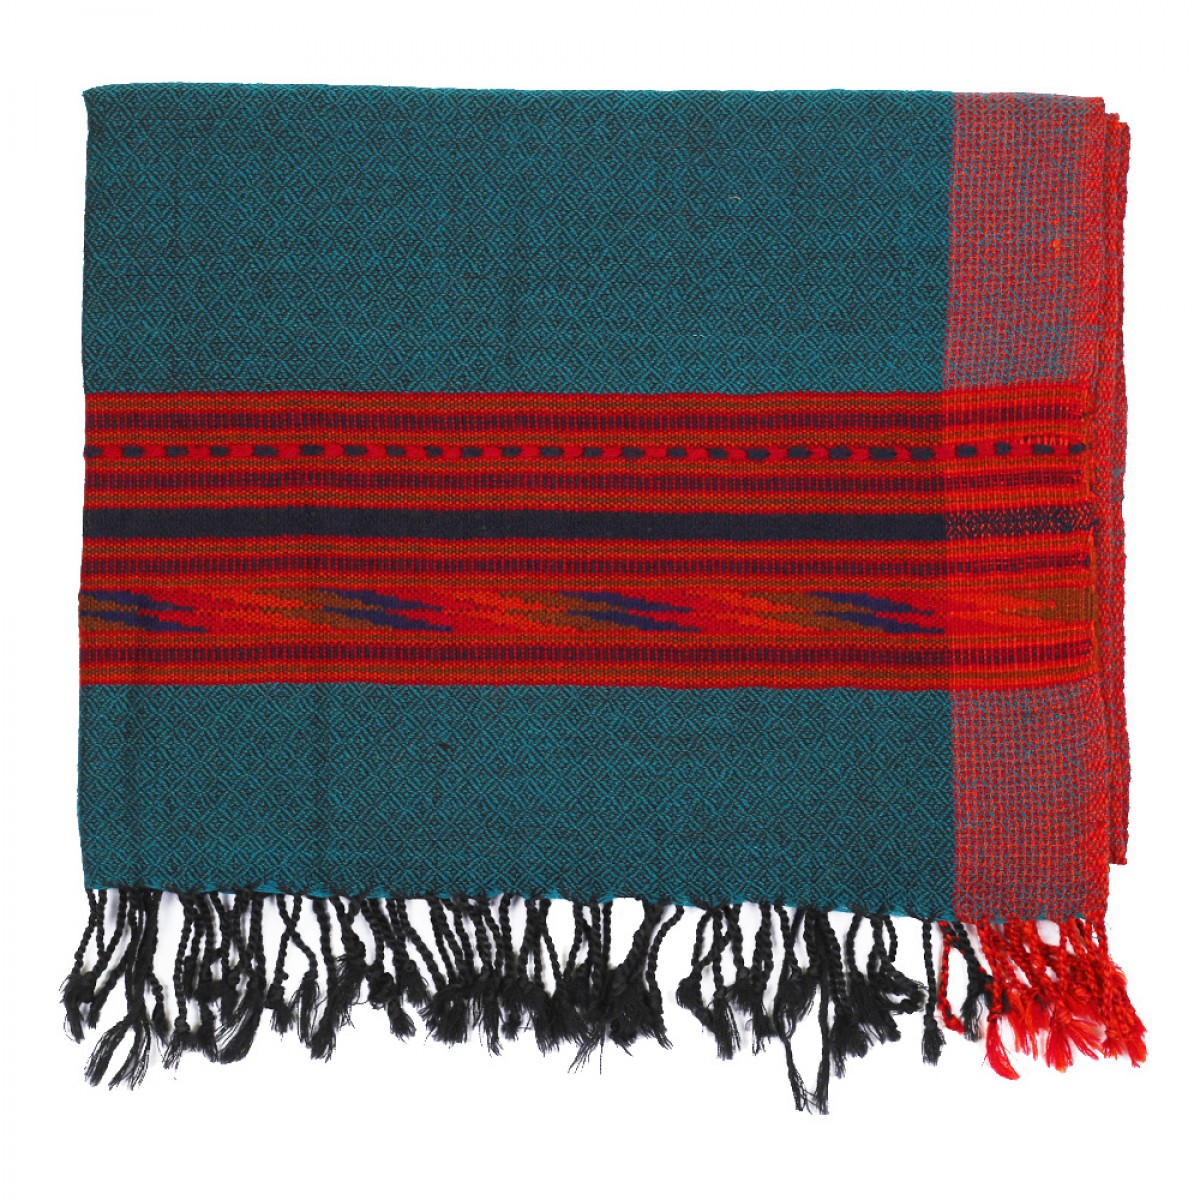 Himalayan Vibes Woolen Stole - Teal & Red